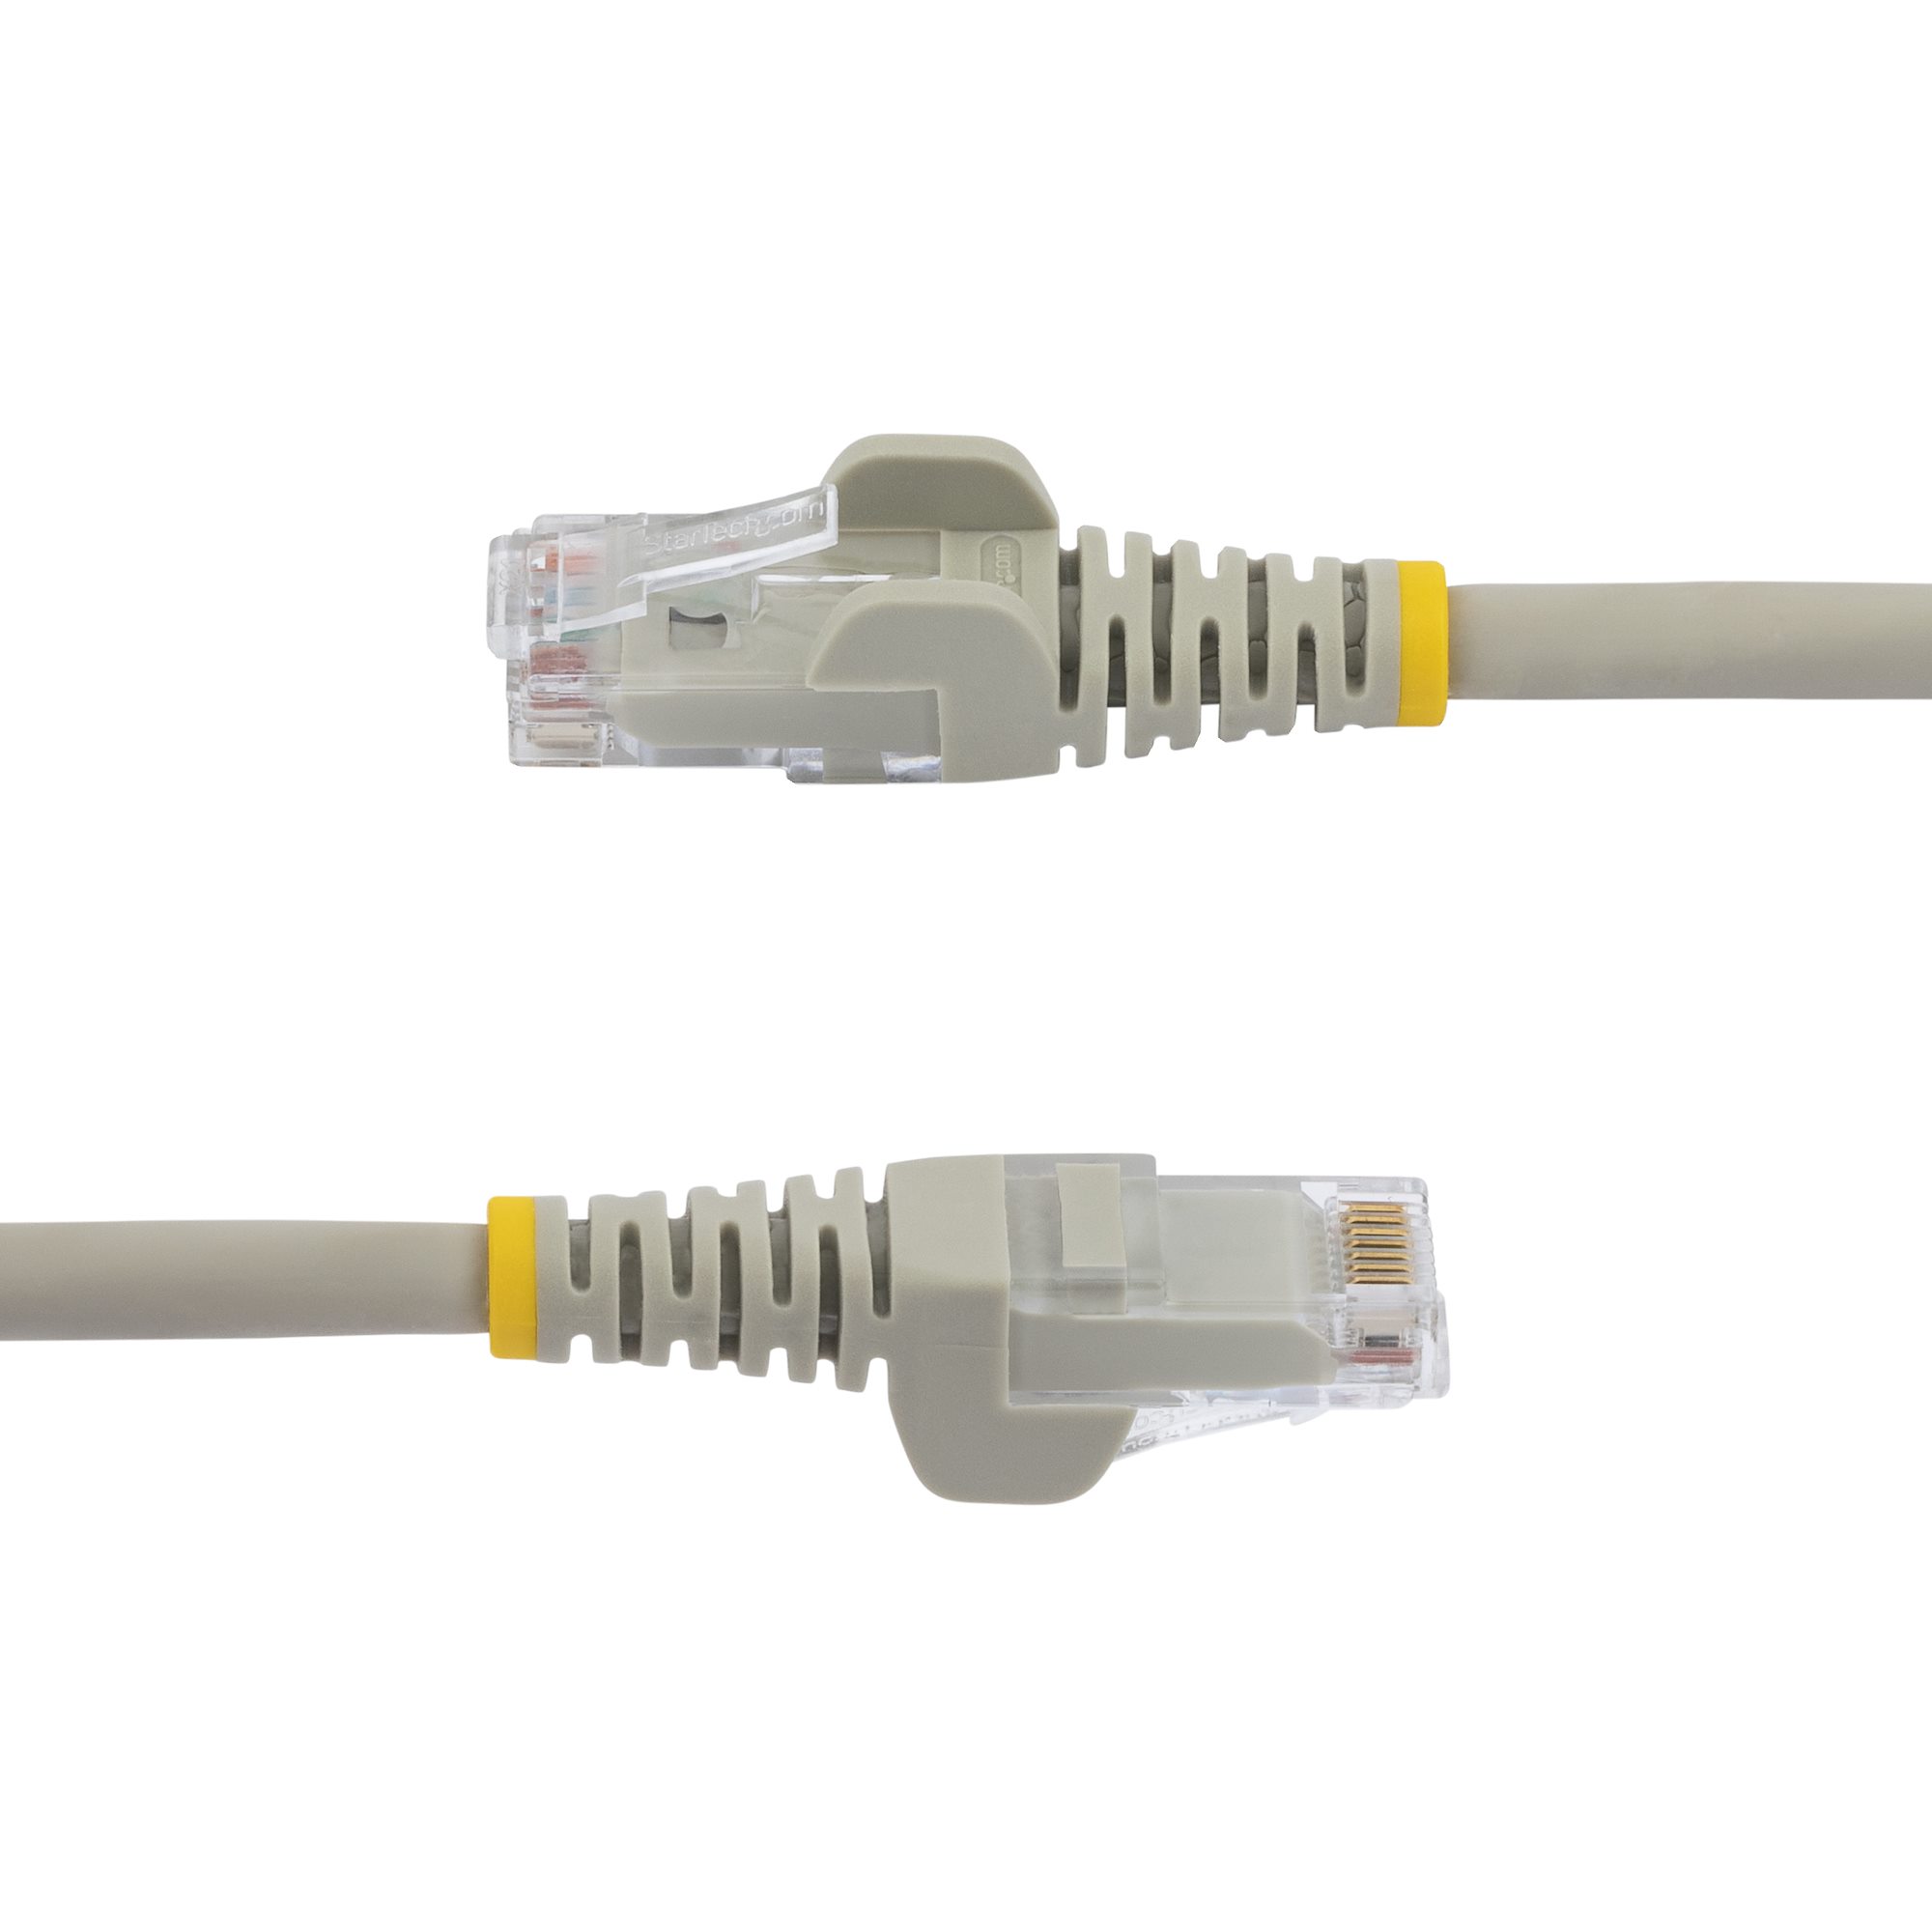 3m(10ft) CAT6 Ethernet Cable - LSZH (Low Smoke Zero Halogen) - 10 Gigabit  650MHz 100W PoE RJ45 UTP Network Patch Cord Snagless with Strain Relief 